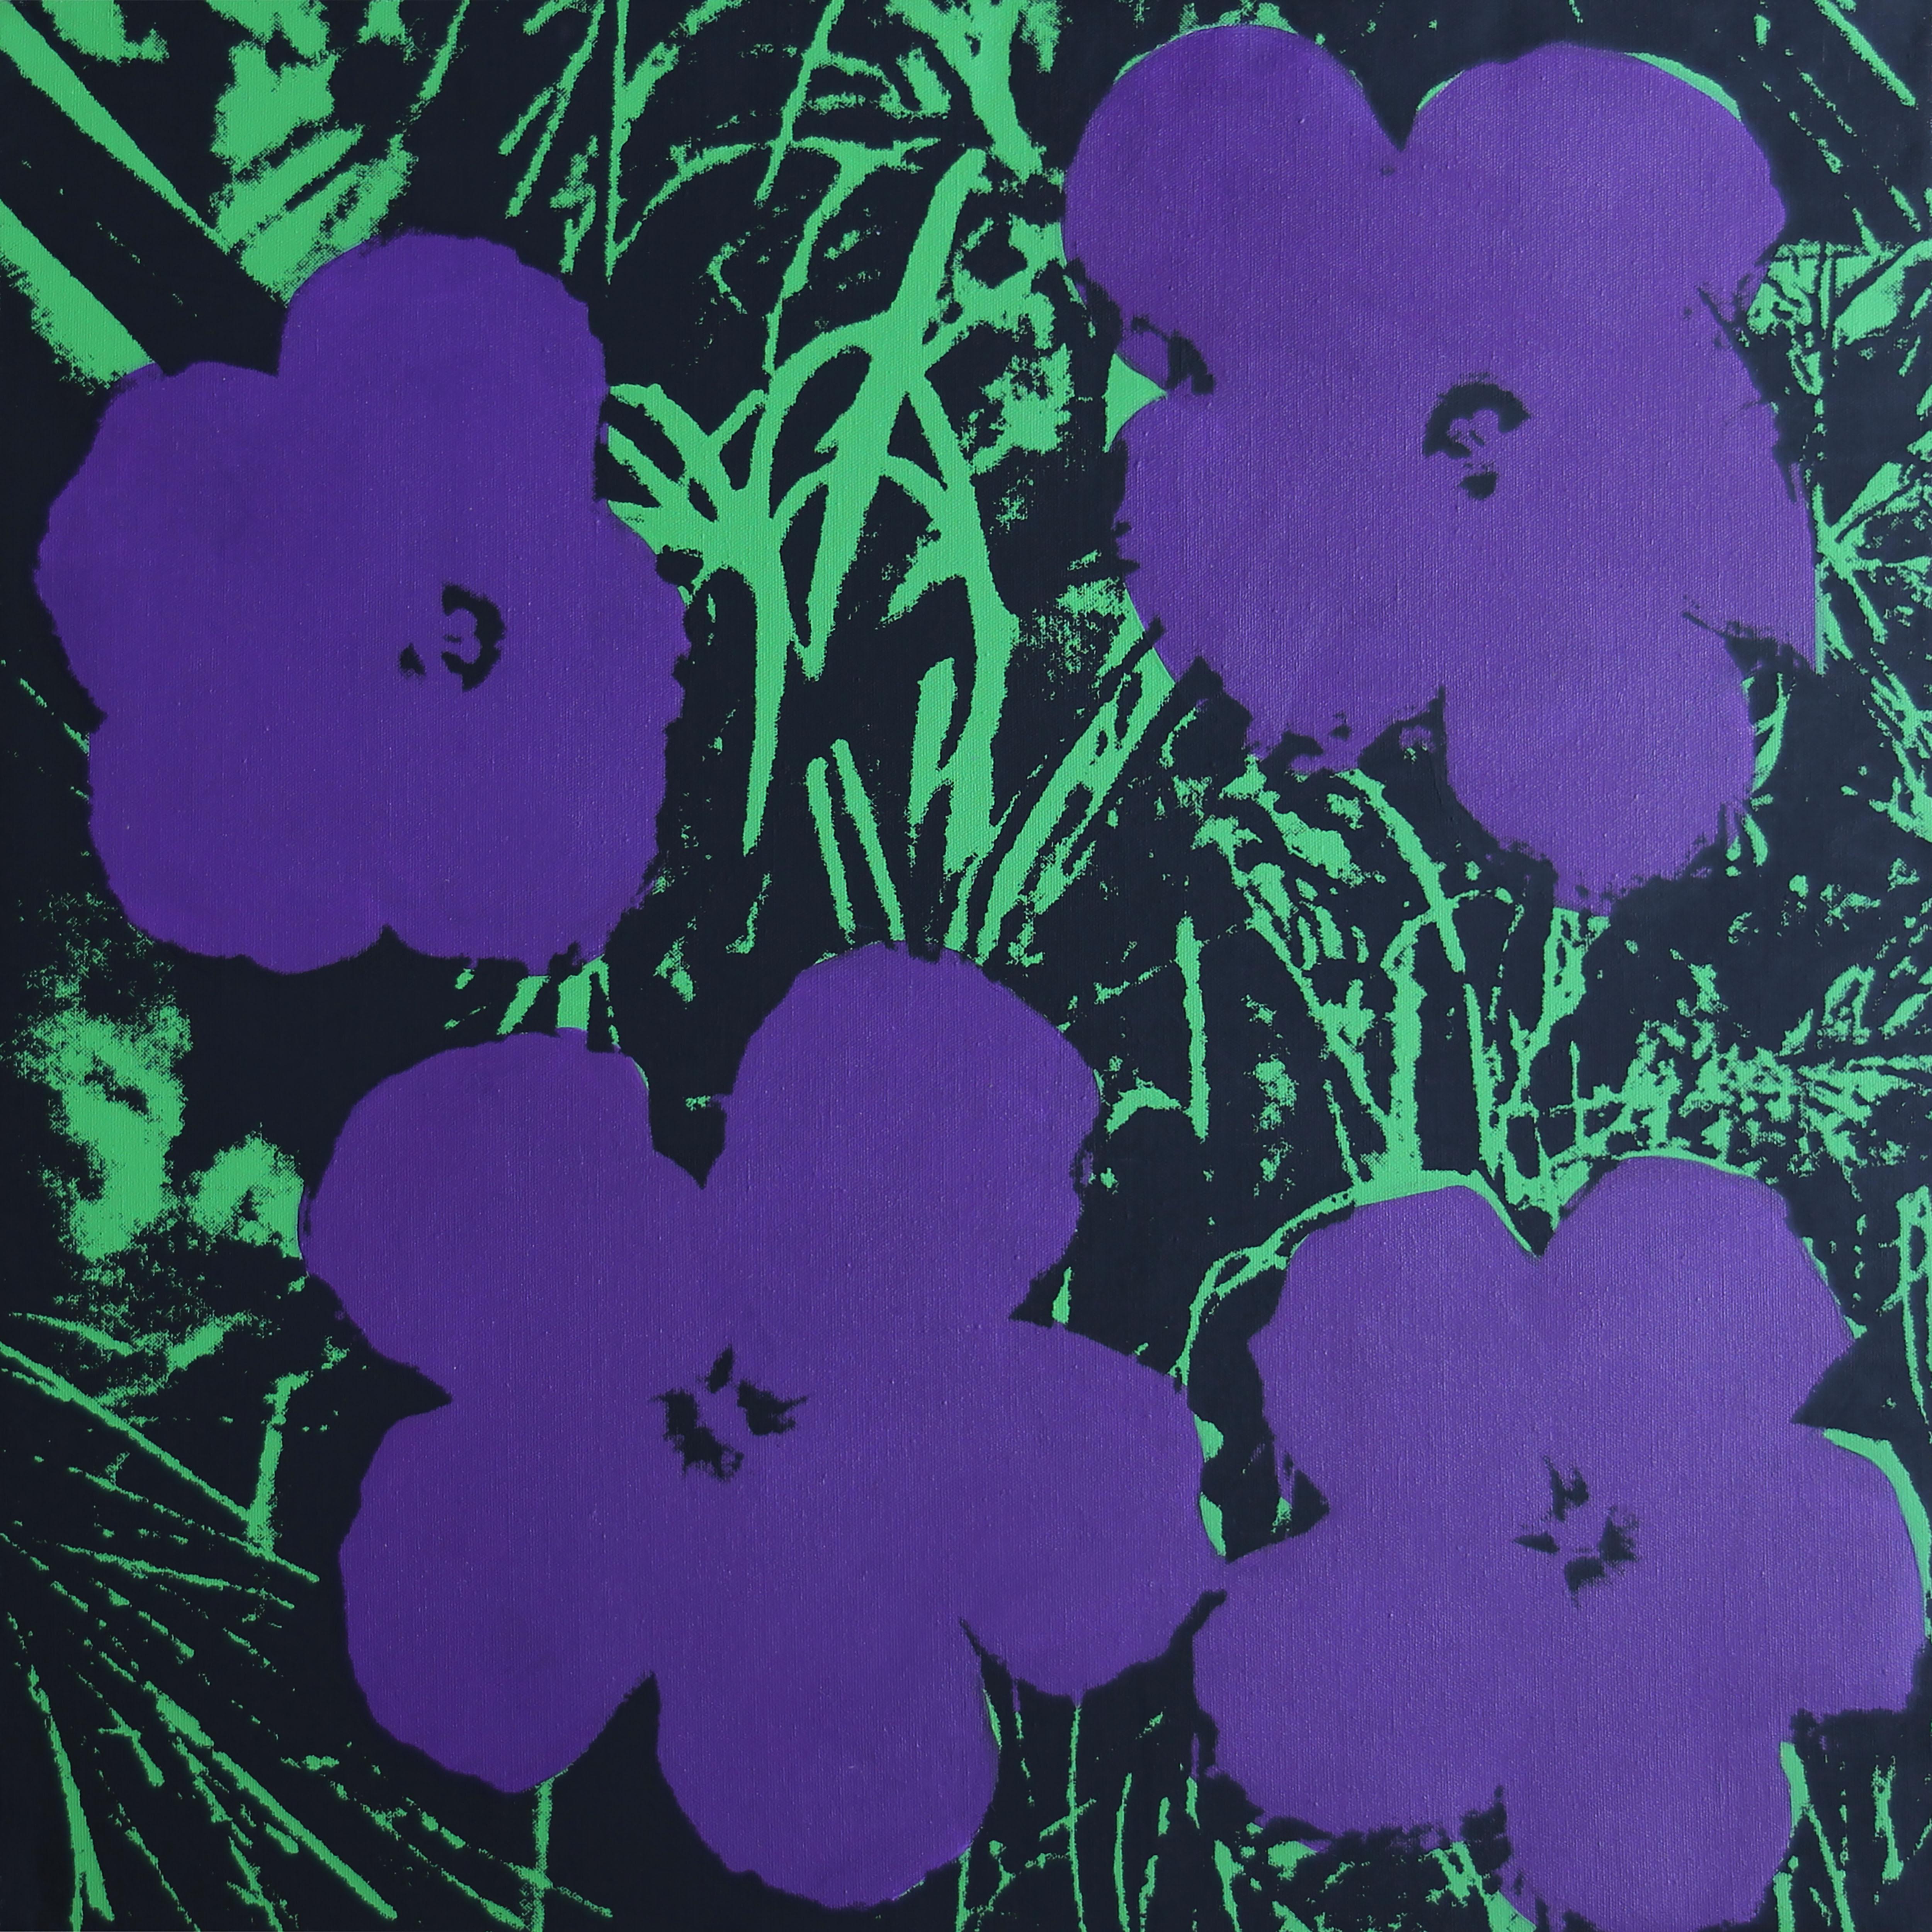 Denied Warhol Flowers, (Violet/Purple) Silkscreen Painting by Charles Lutz
Silkscreen and acrylic on canvas with Denied stamp of the Andy Warhol Art Authentication Board.
24 x 24" inches
2008

Lutz's 2007 ''Warhol Denied'' series gained